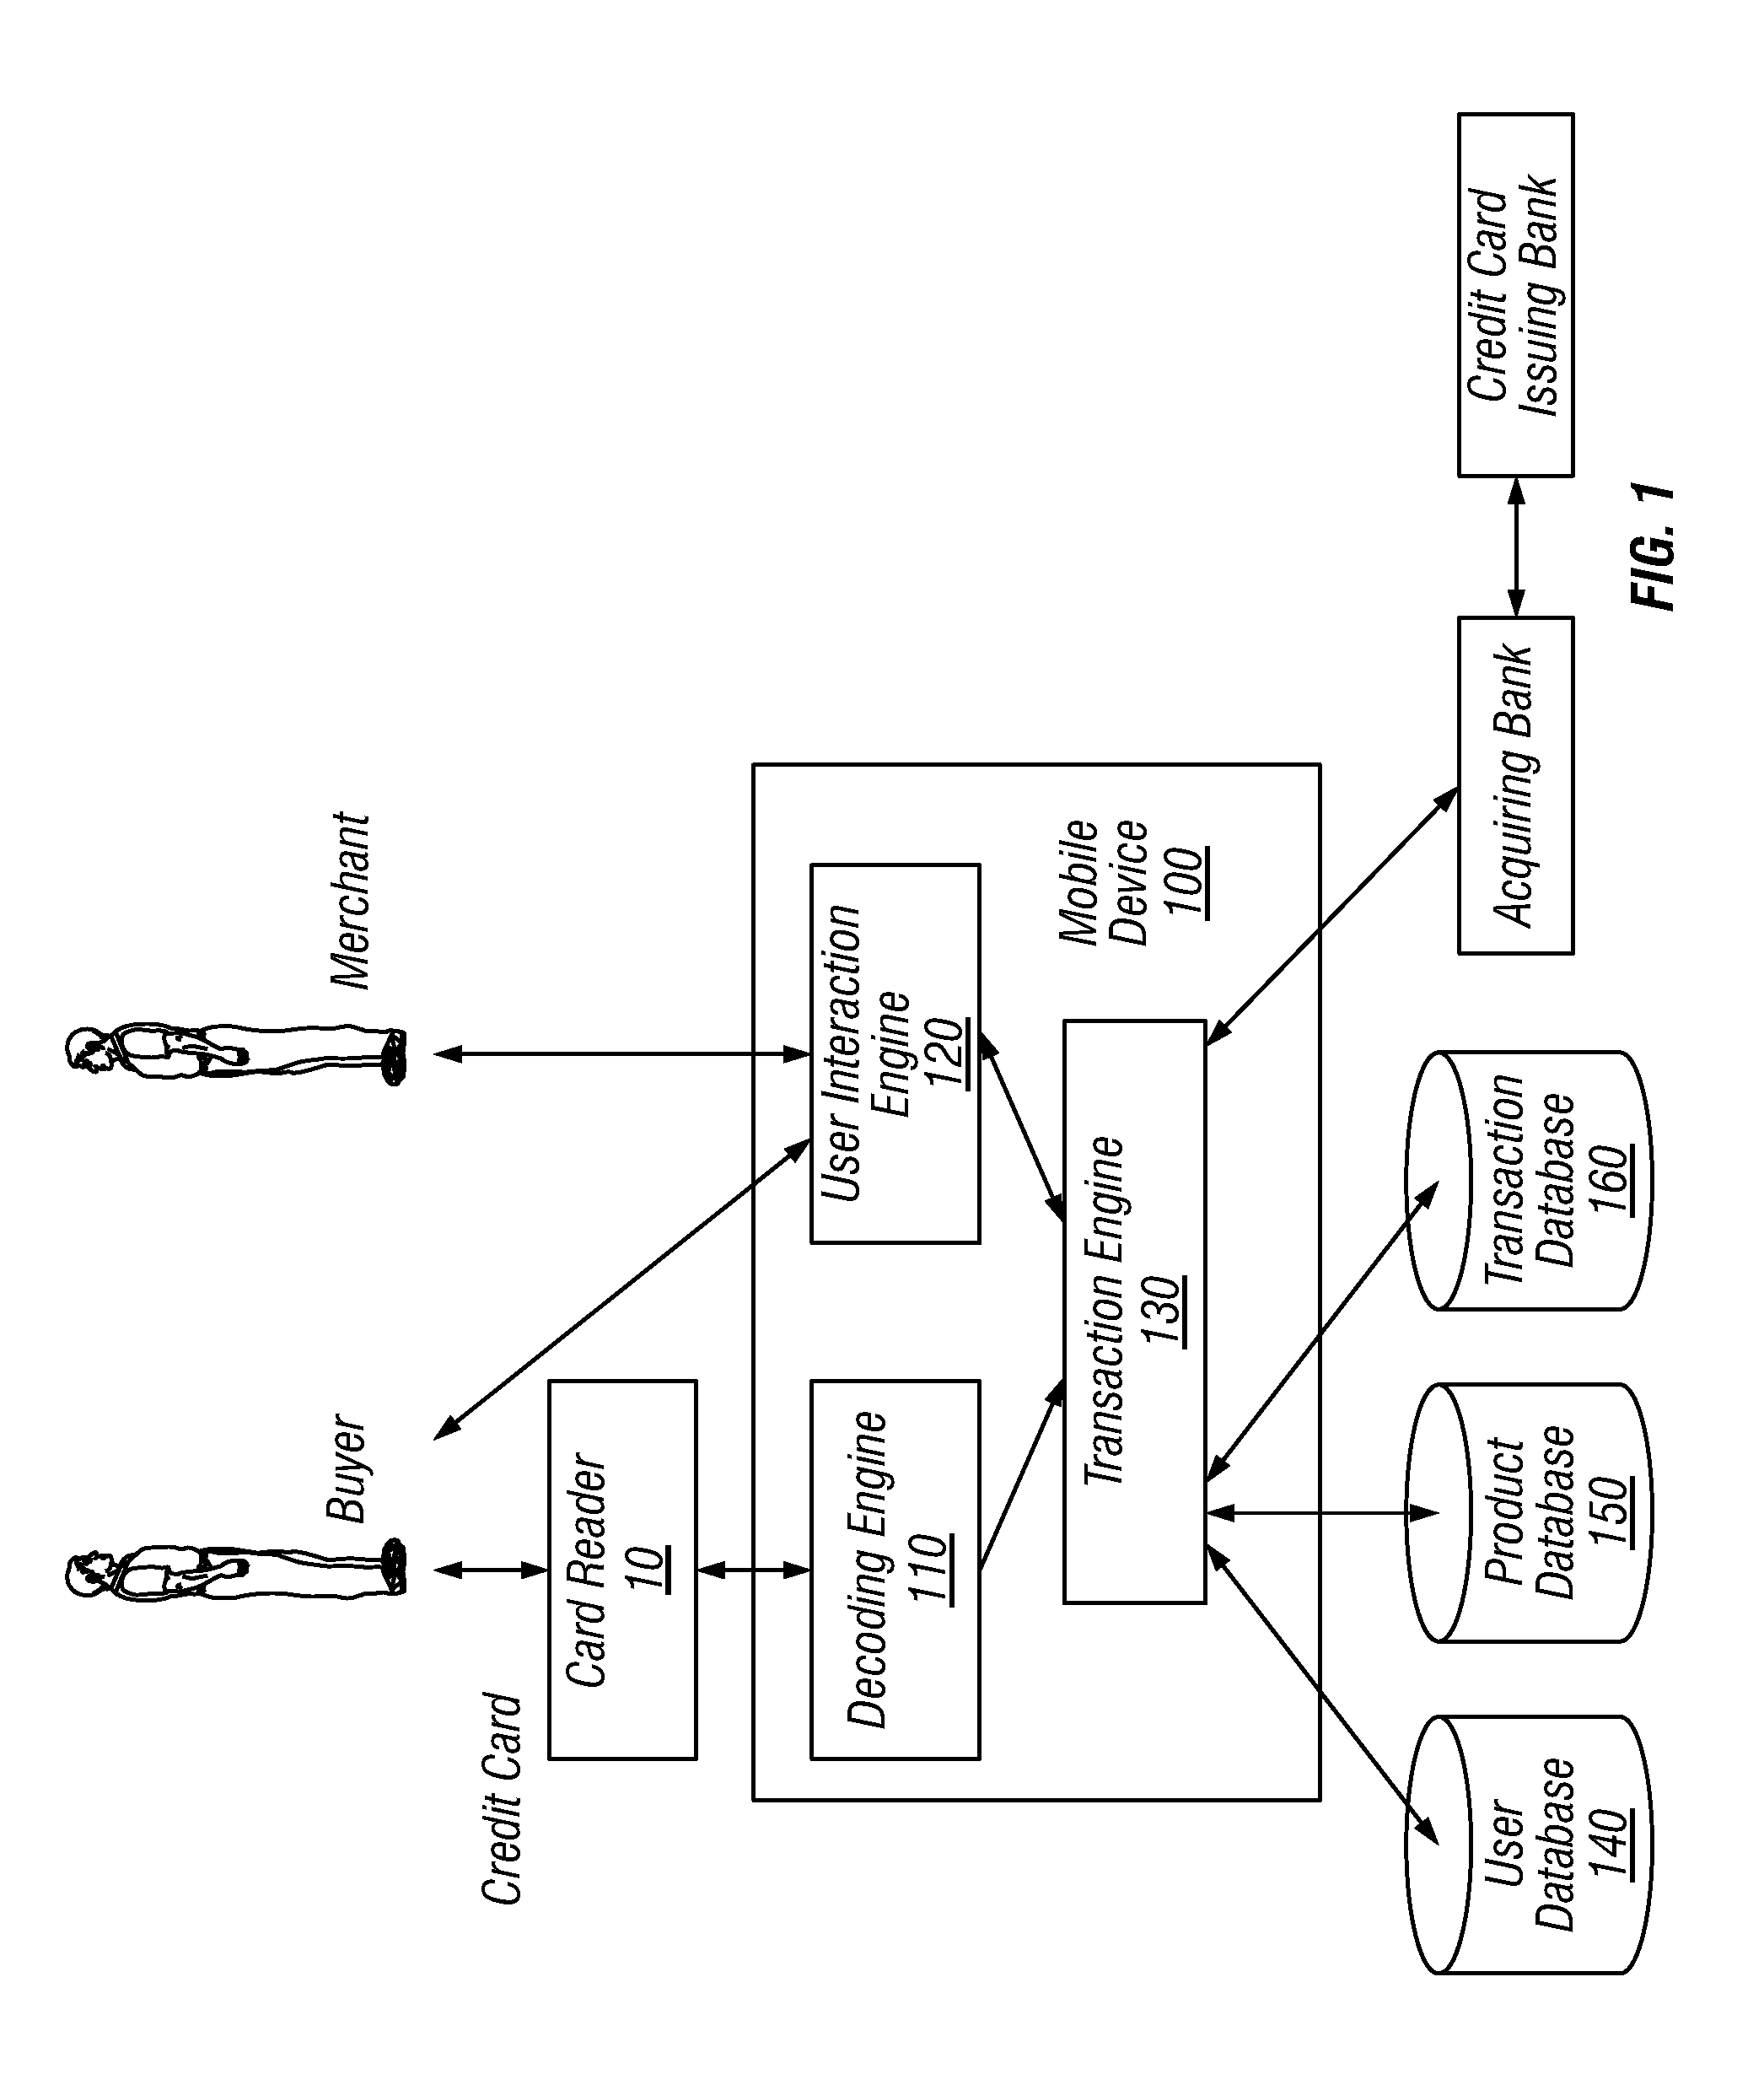 Method of transmitting information from efficient communication protocol card readers to mobile devices